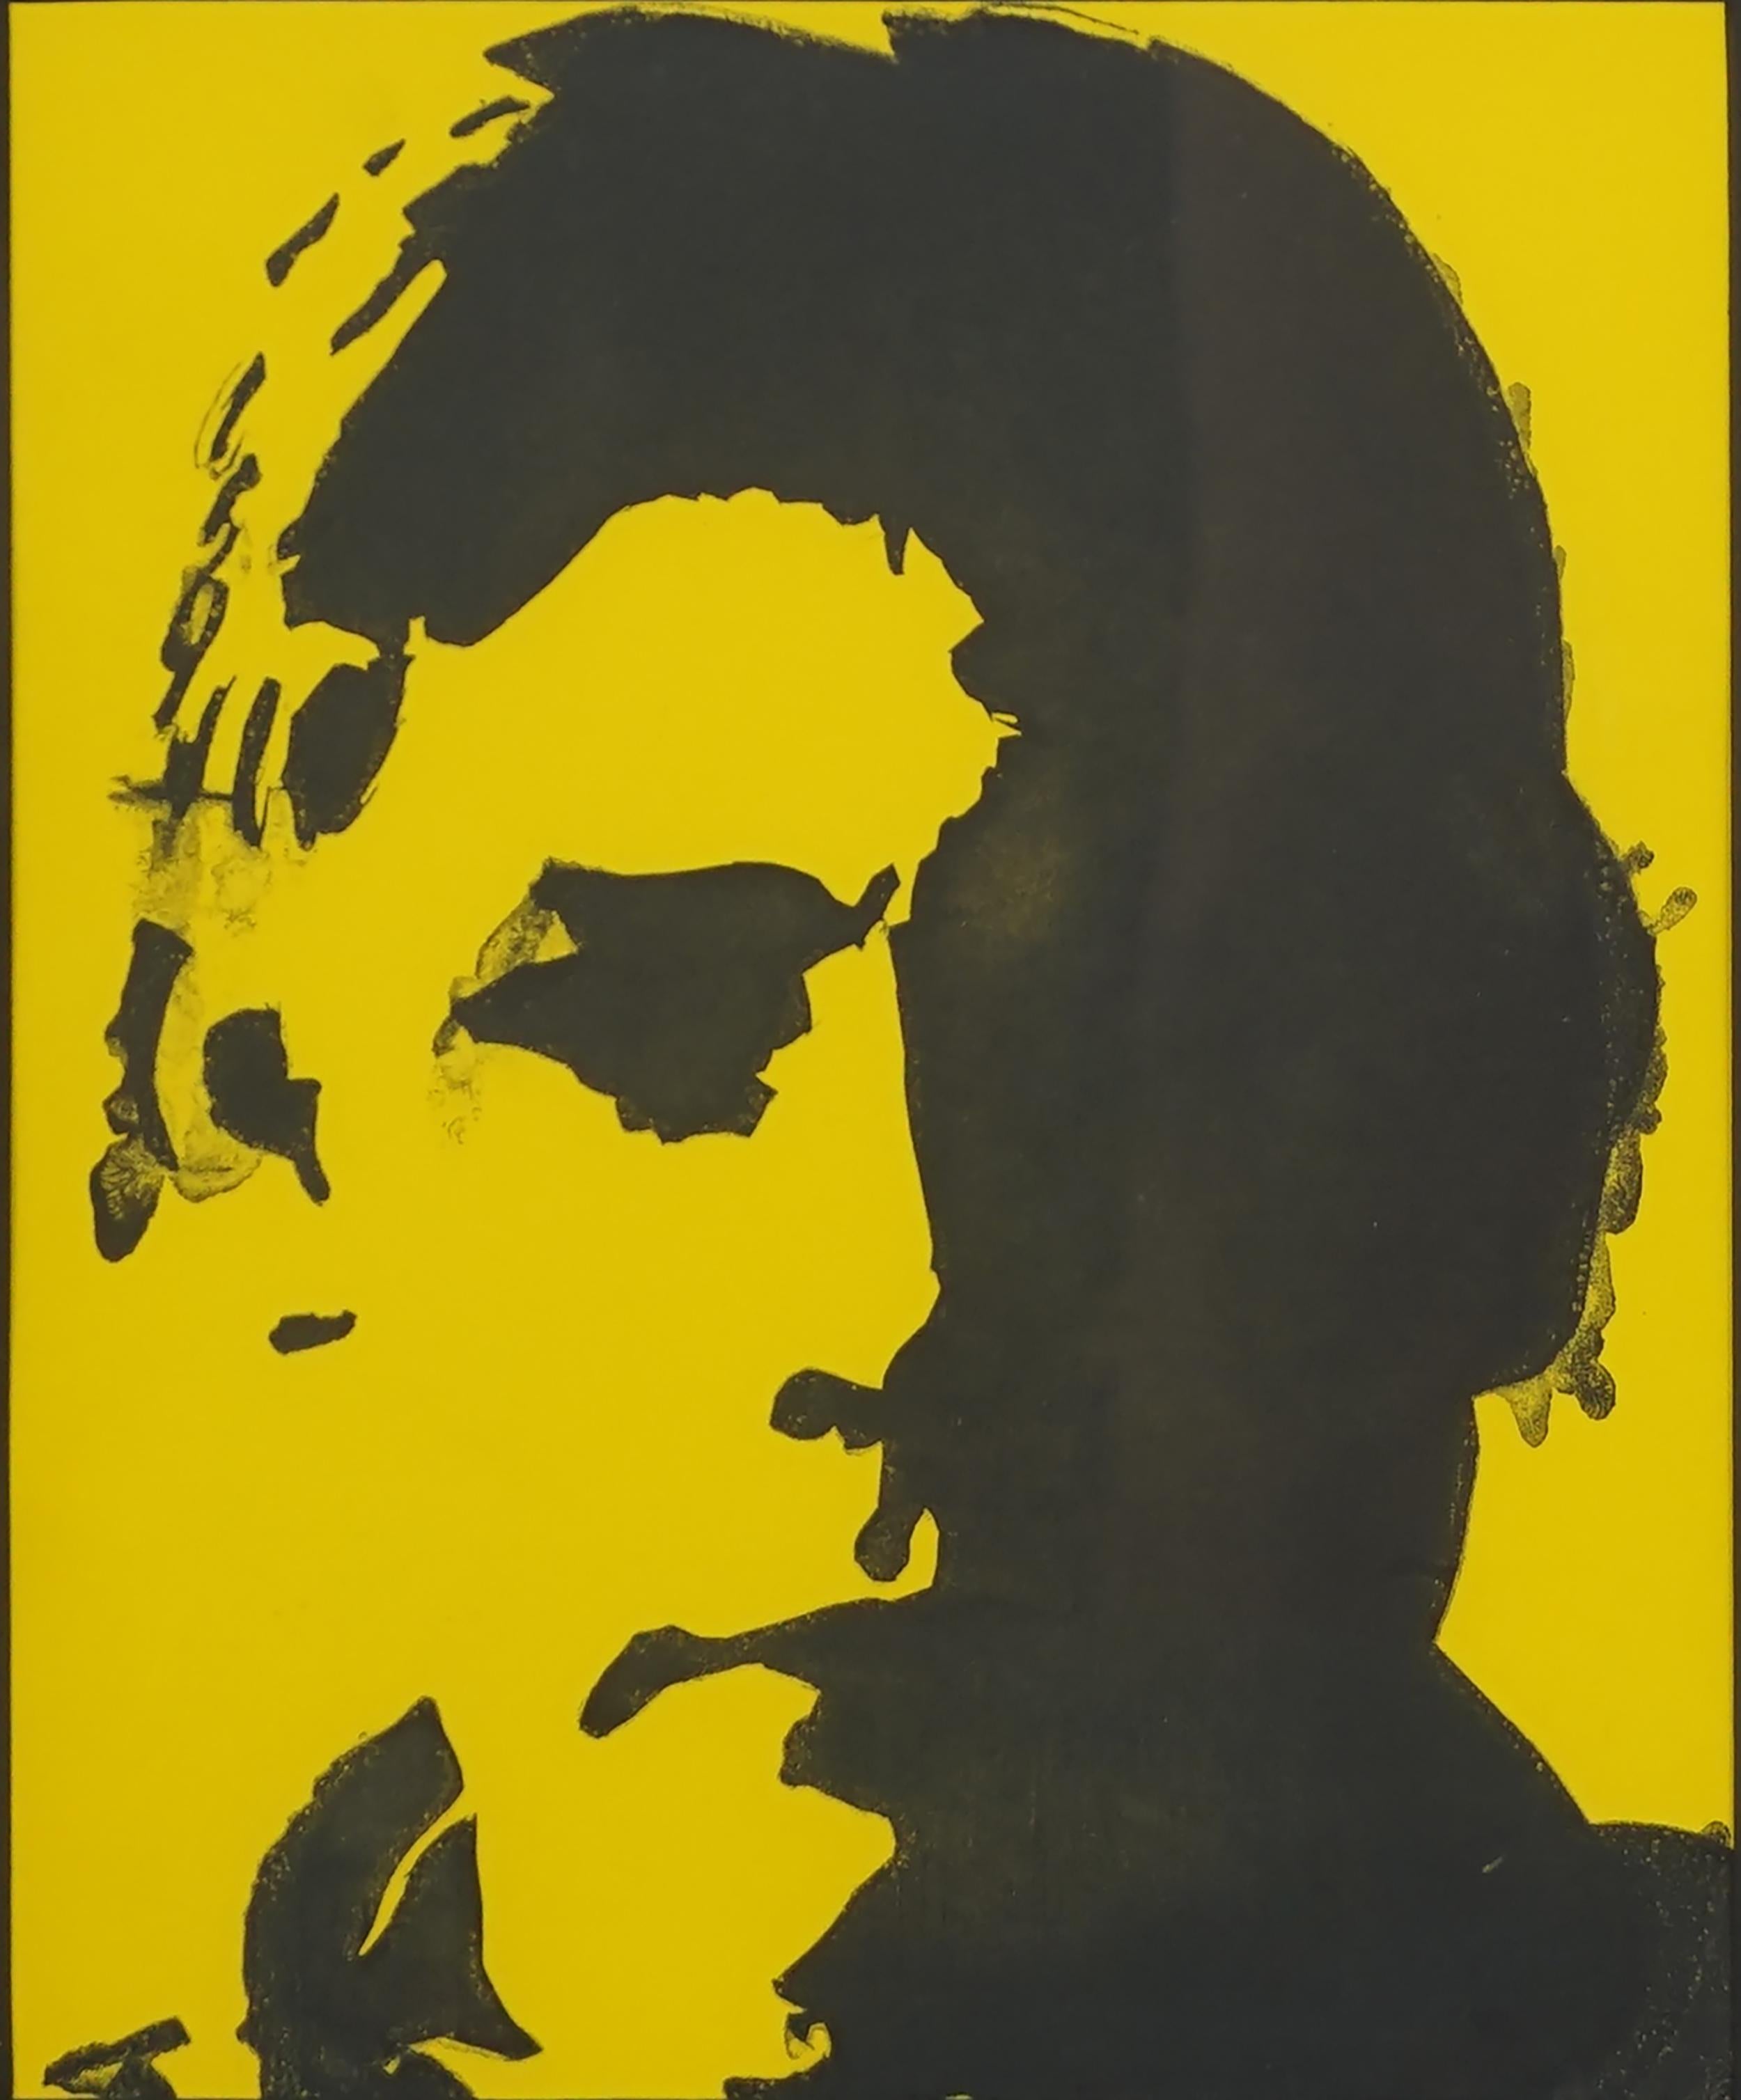 Wonderful diptych silkscreen of man in yellow and red by unknown artist, circa 2000. Unsigned. Presented in white metal frame under glass. Originally sold by Walters Adams Gallery. Each image measures 9.75